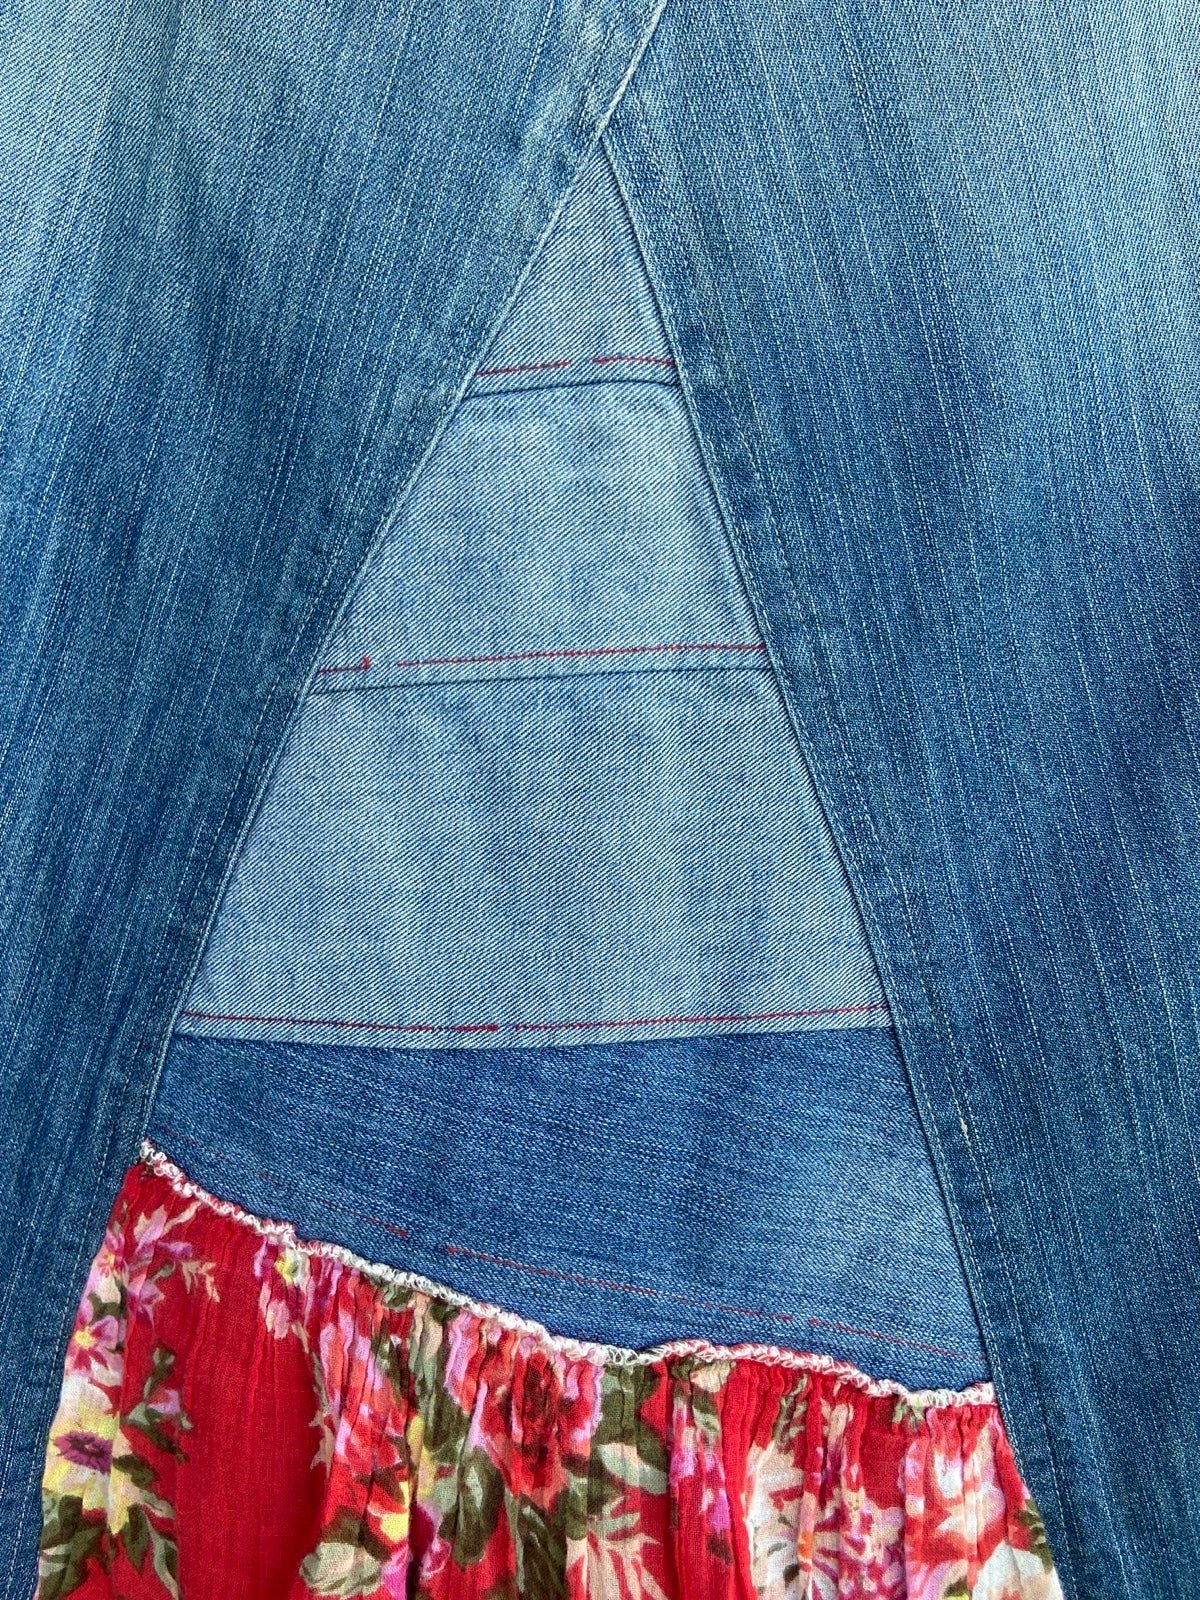 good price Boho Western Women’s Denim Skirt w/ Red Ruffles size 4 nlFSMd4IL Outlet Store